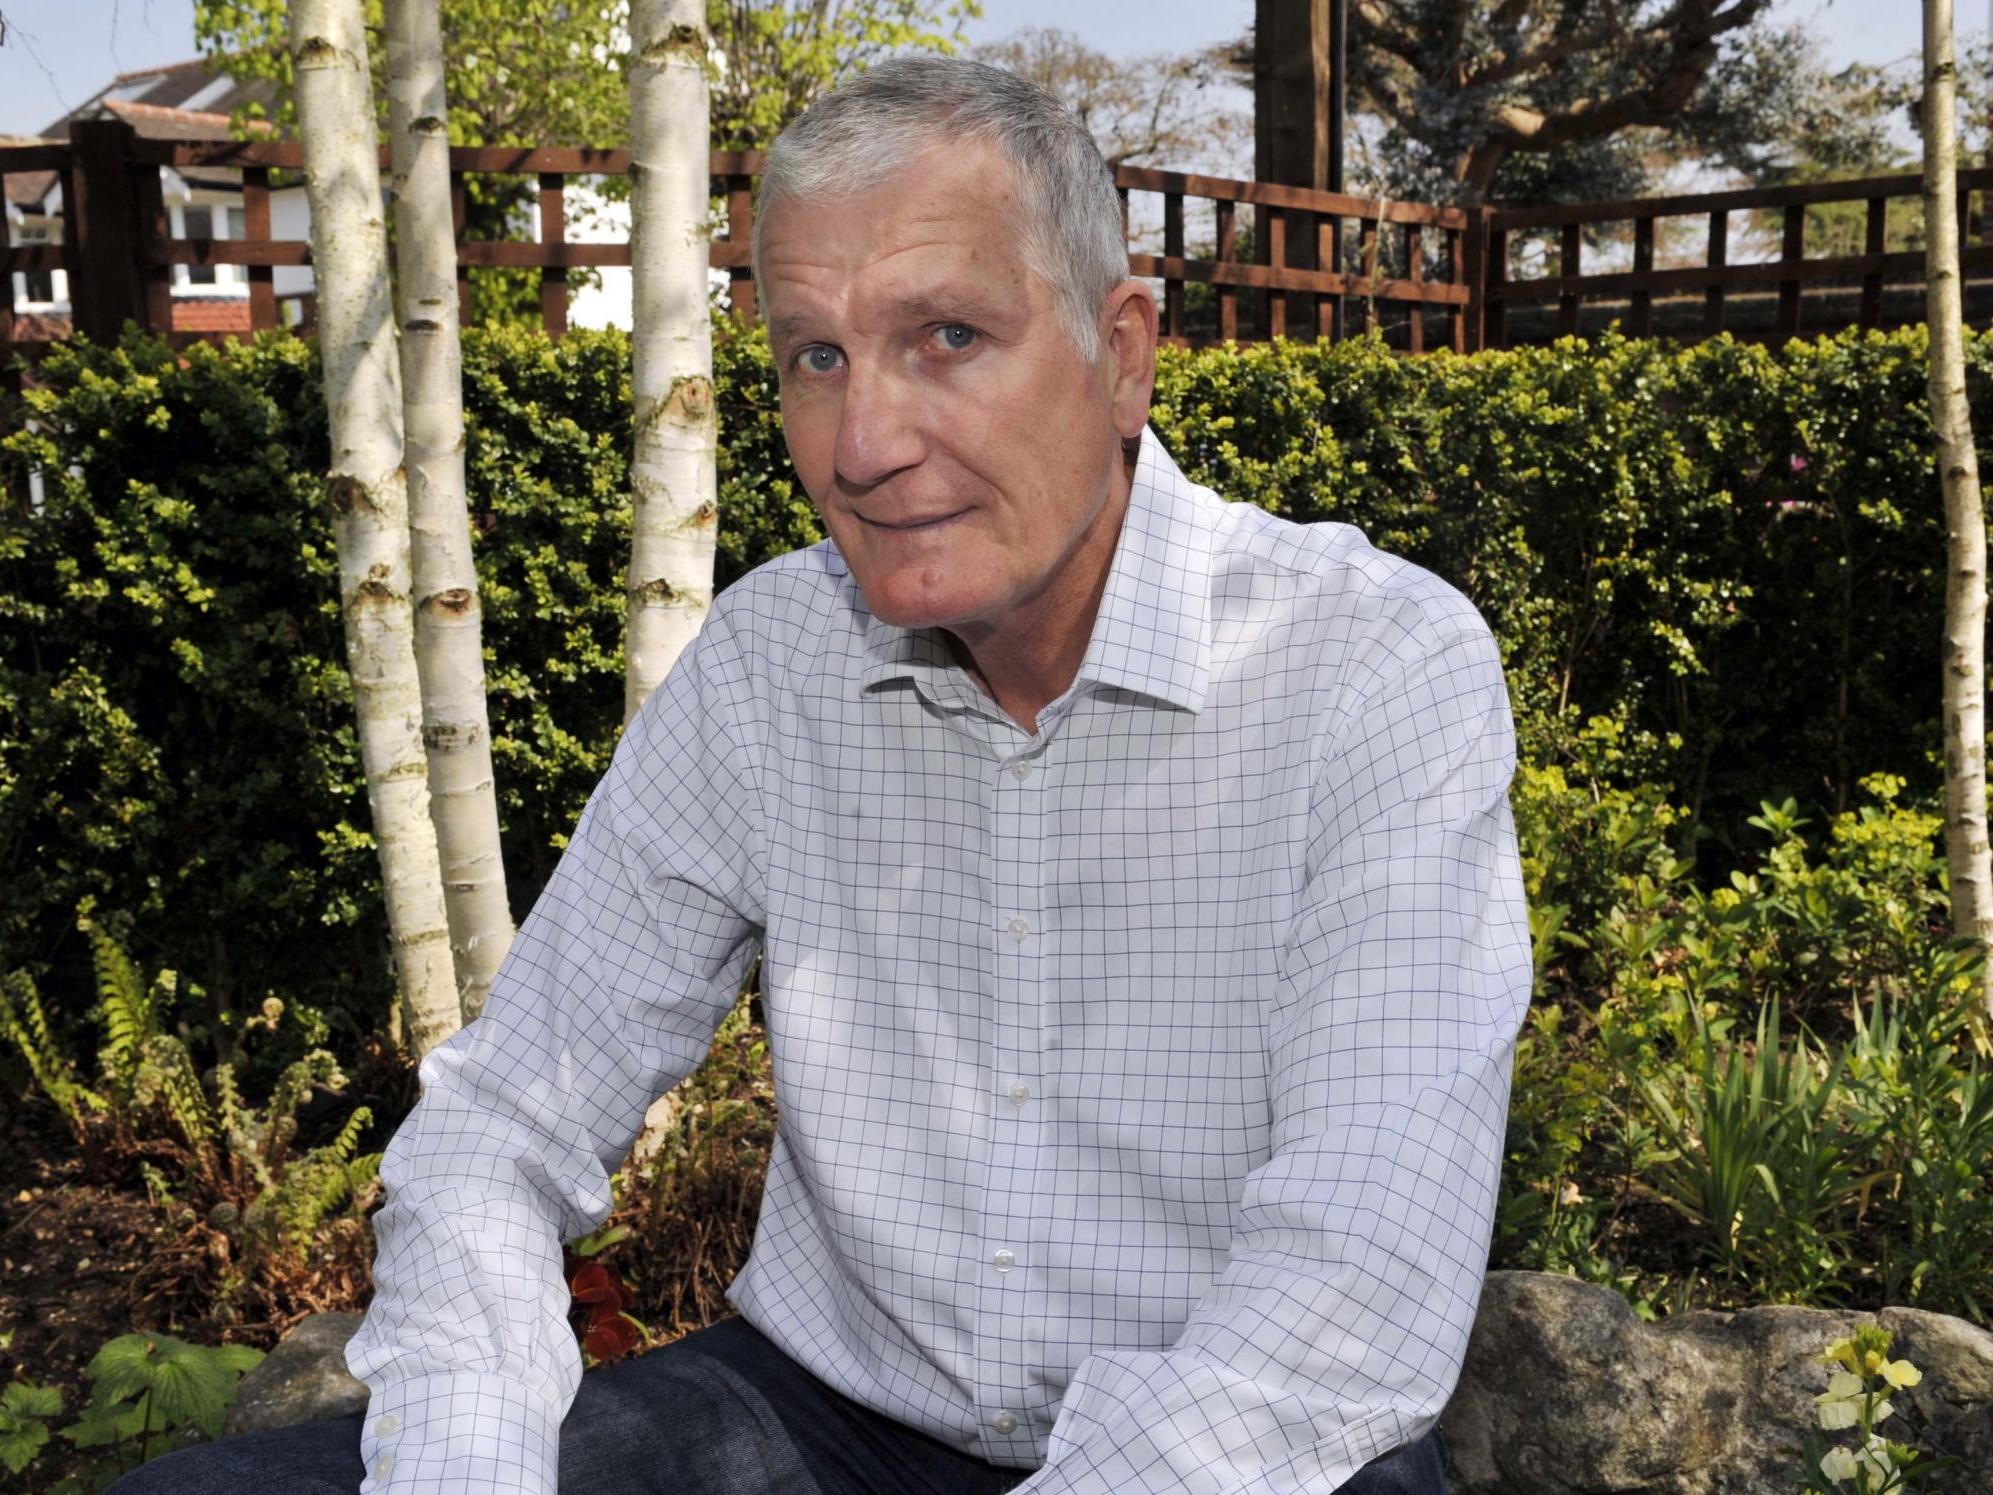 the former England cricket captain Bob Willis has died aged 70